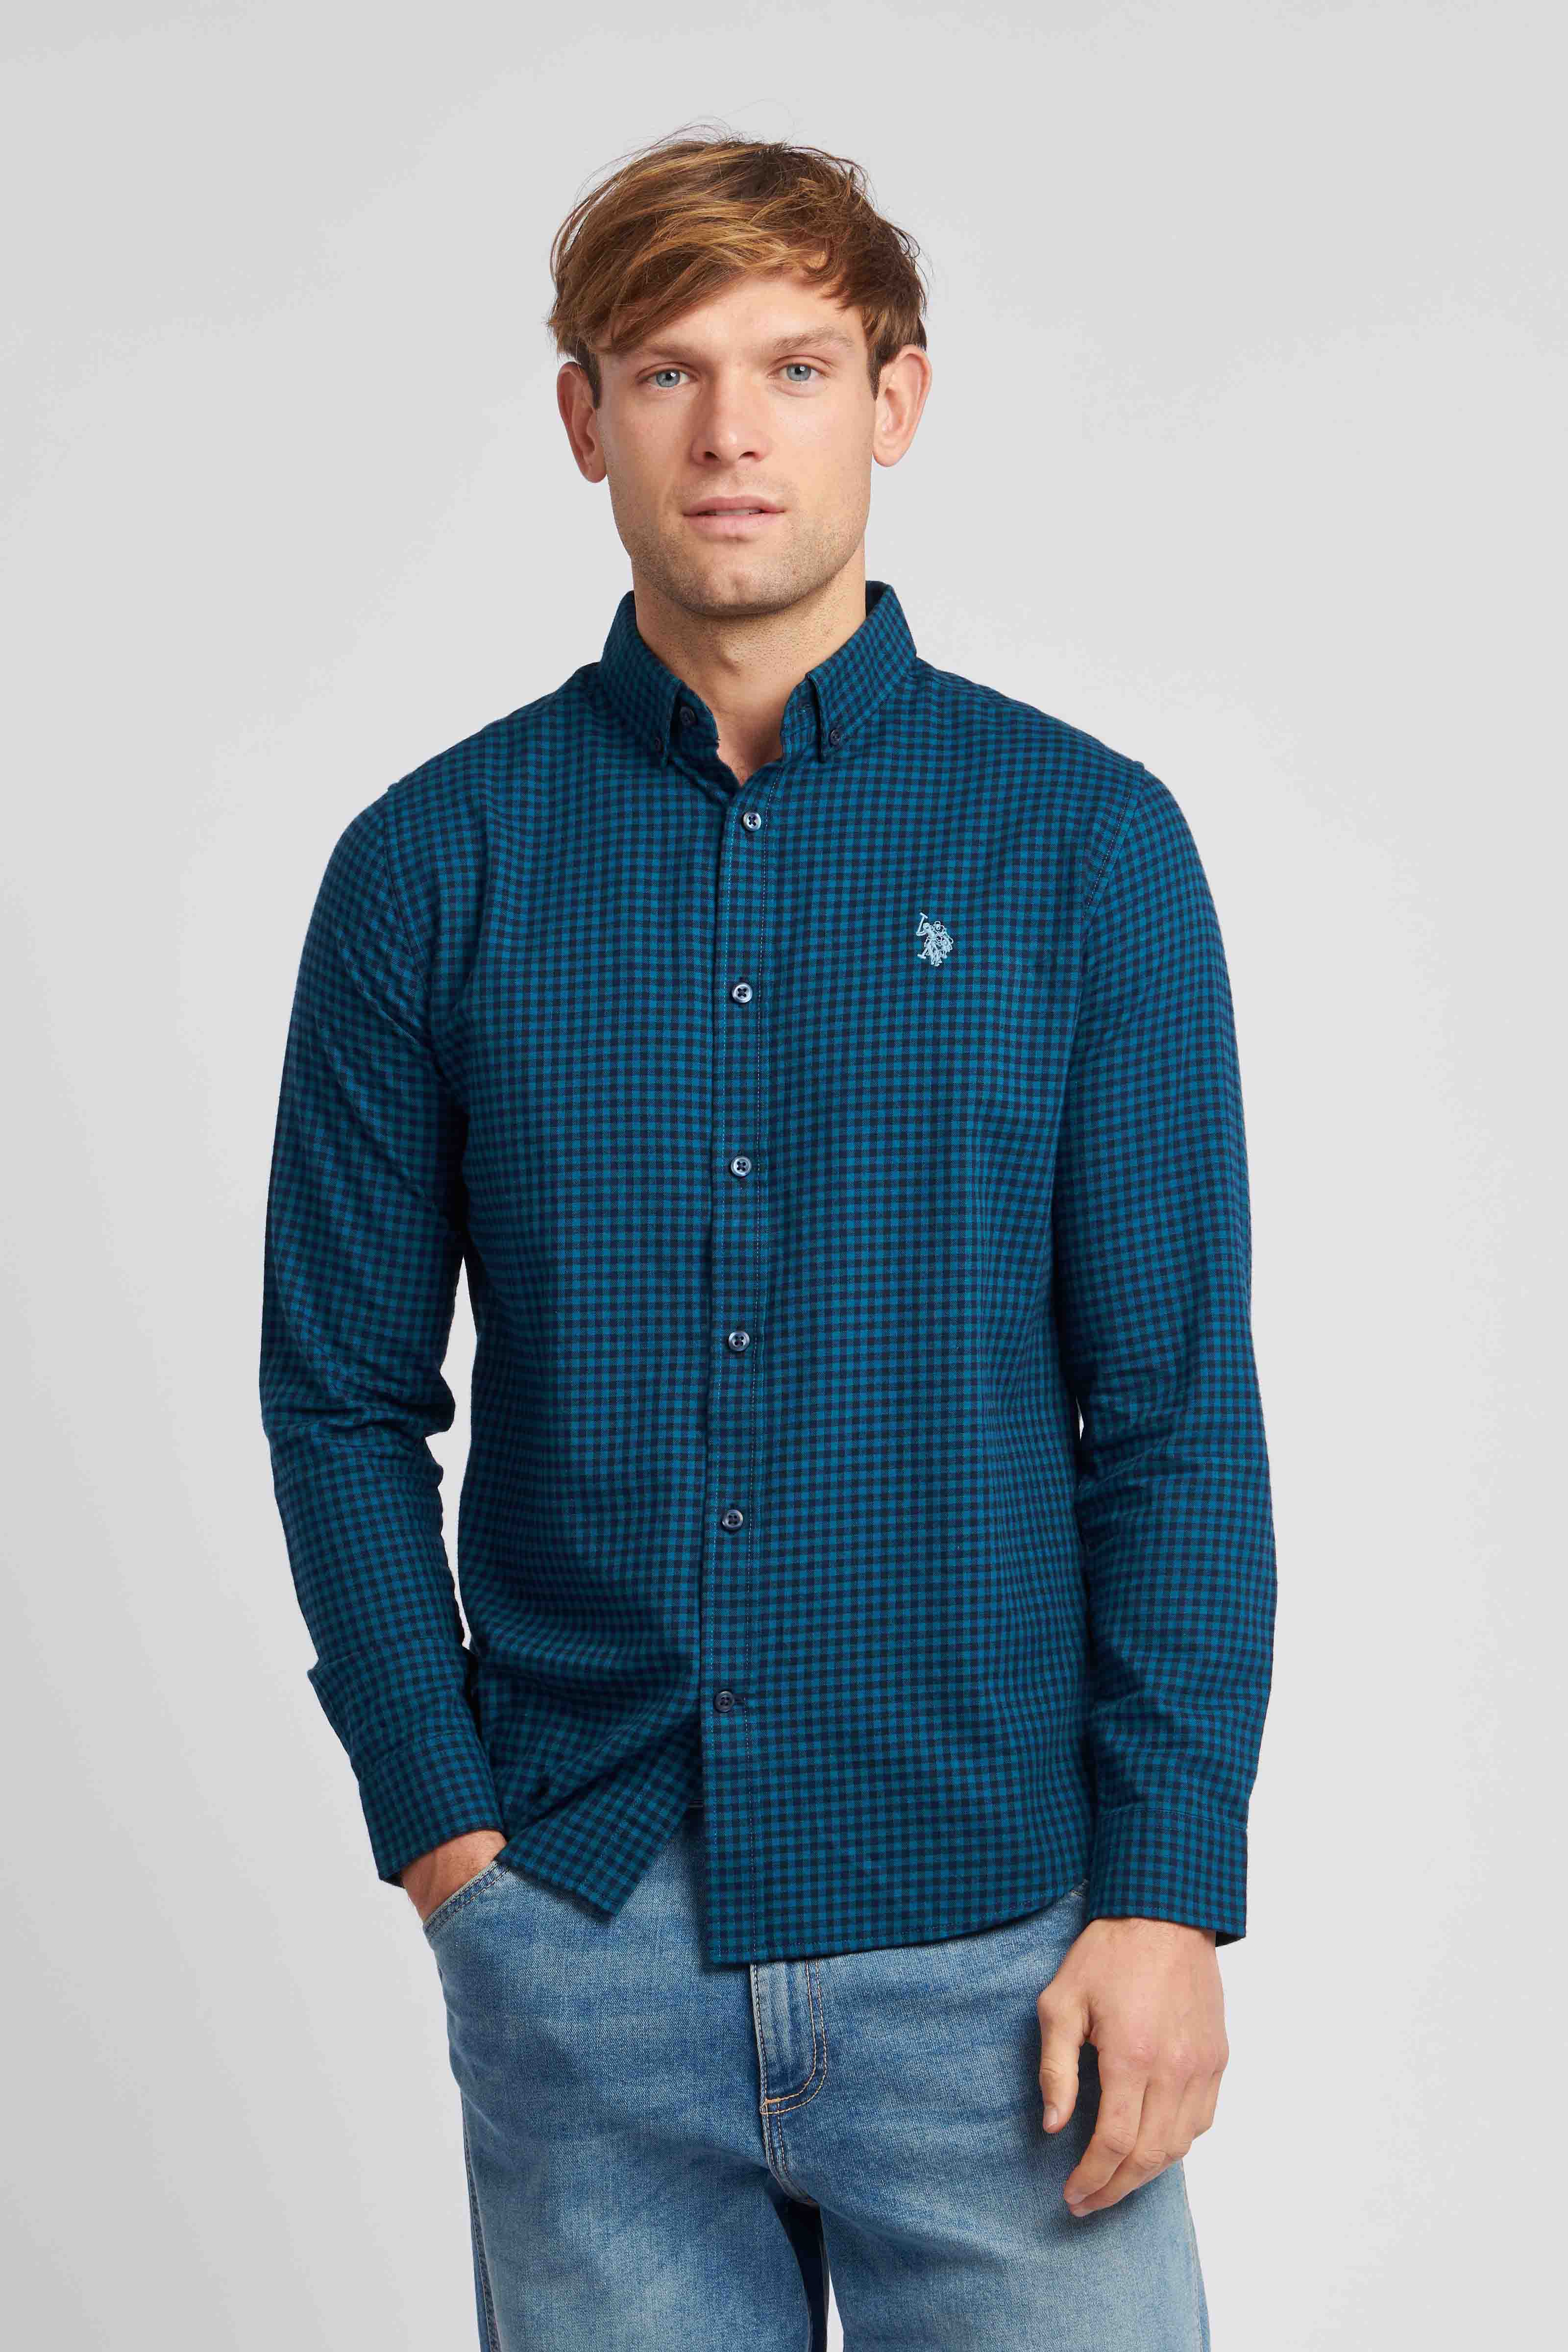 U.S. Polo Assn. Mens Brushed Dobby Shirt in Legion Blue Spring Lake DHM